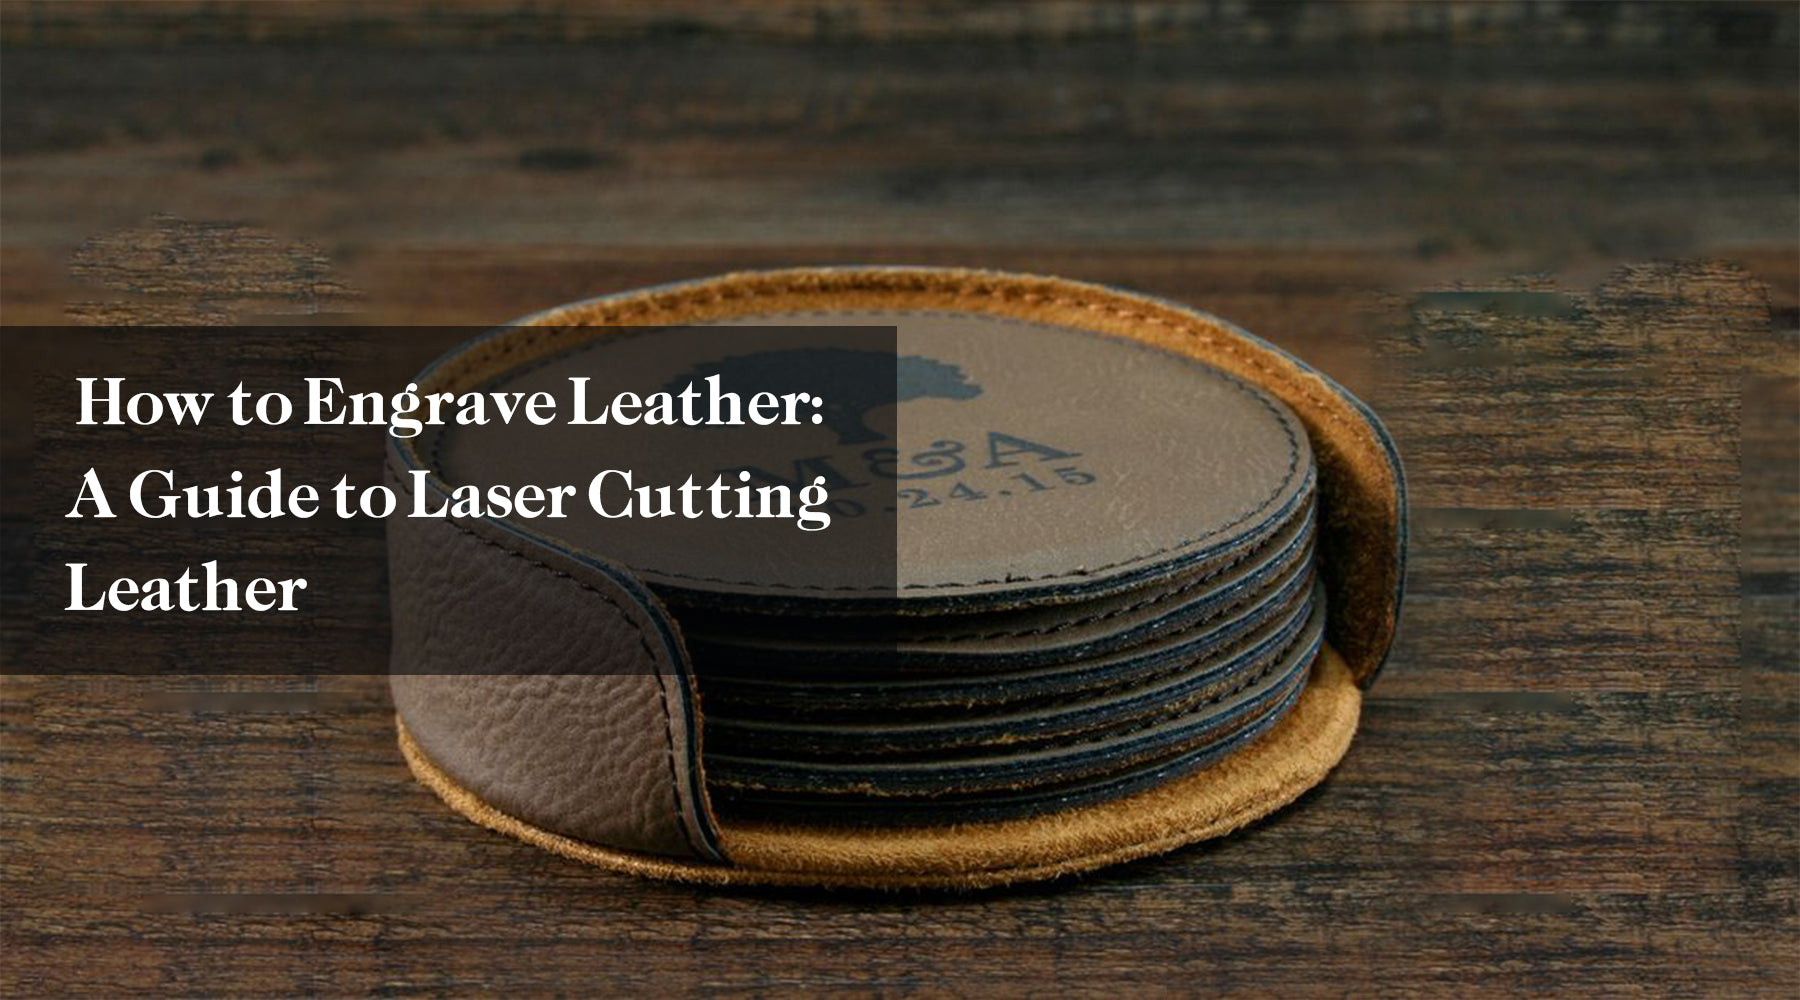 How to Engrave Leather: A Guide to Laser Cutting Leather